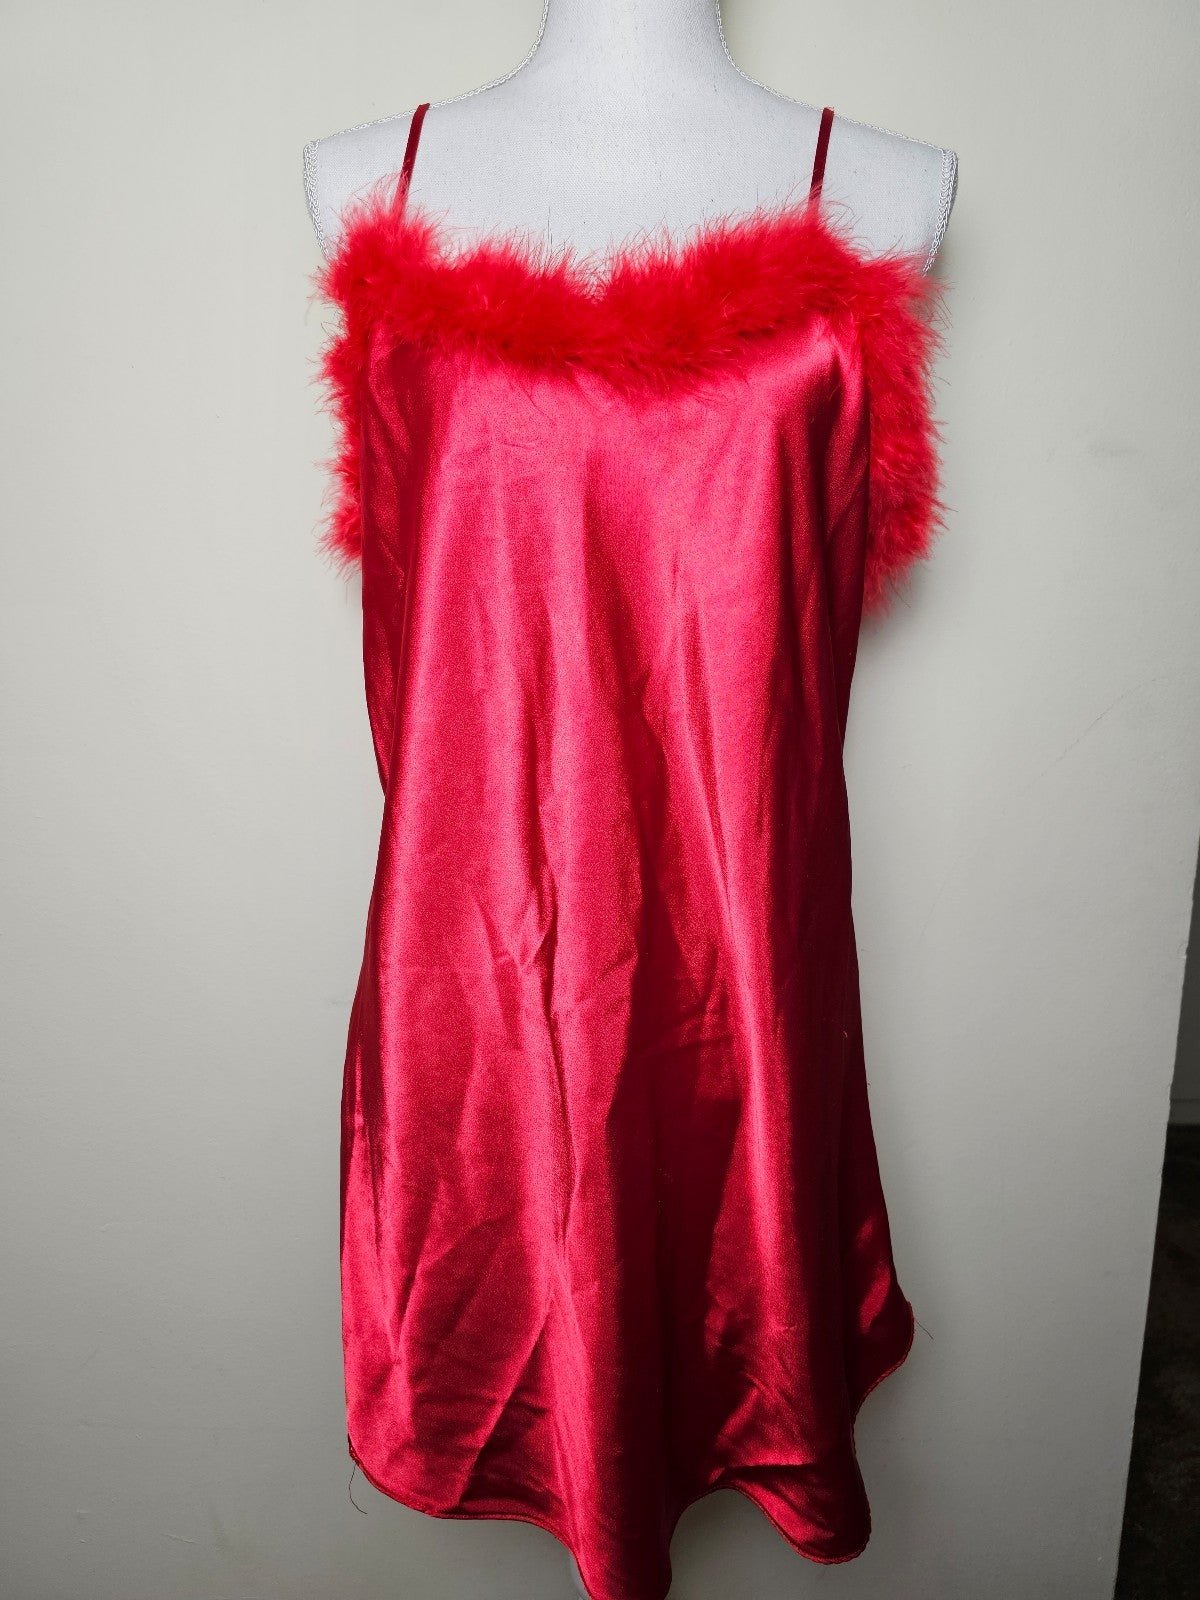 Wholesale price Red Satin Feather Sexy Night Gown Vinta